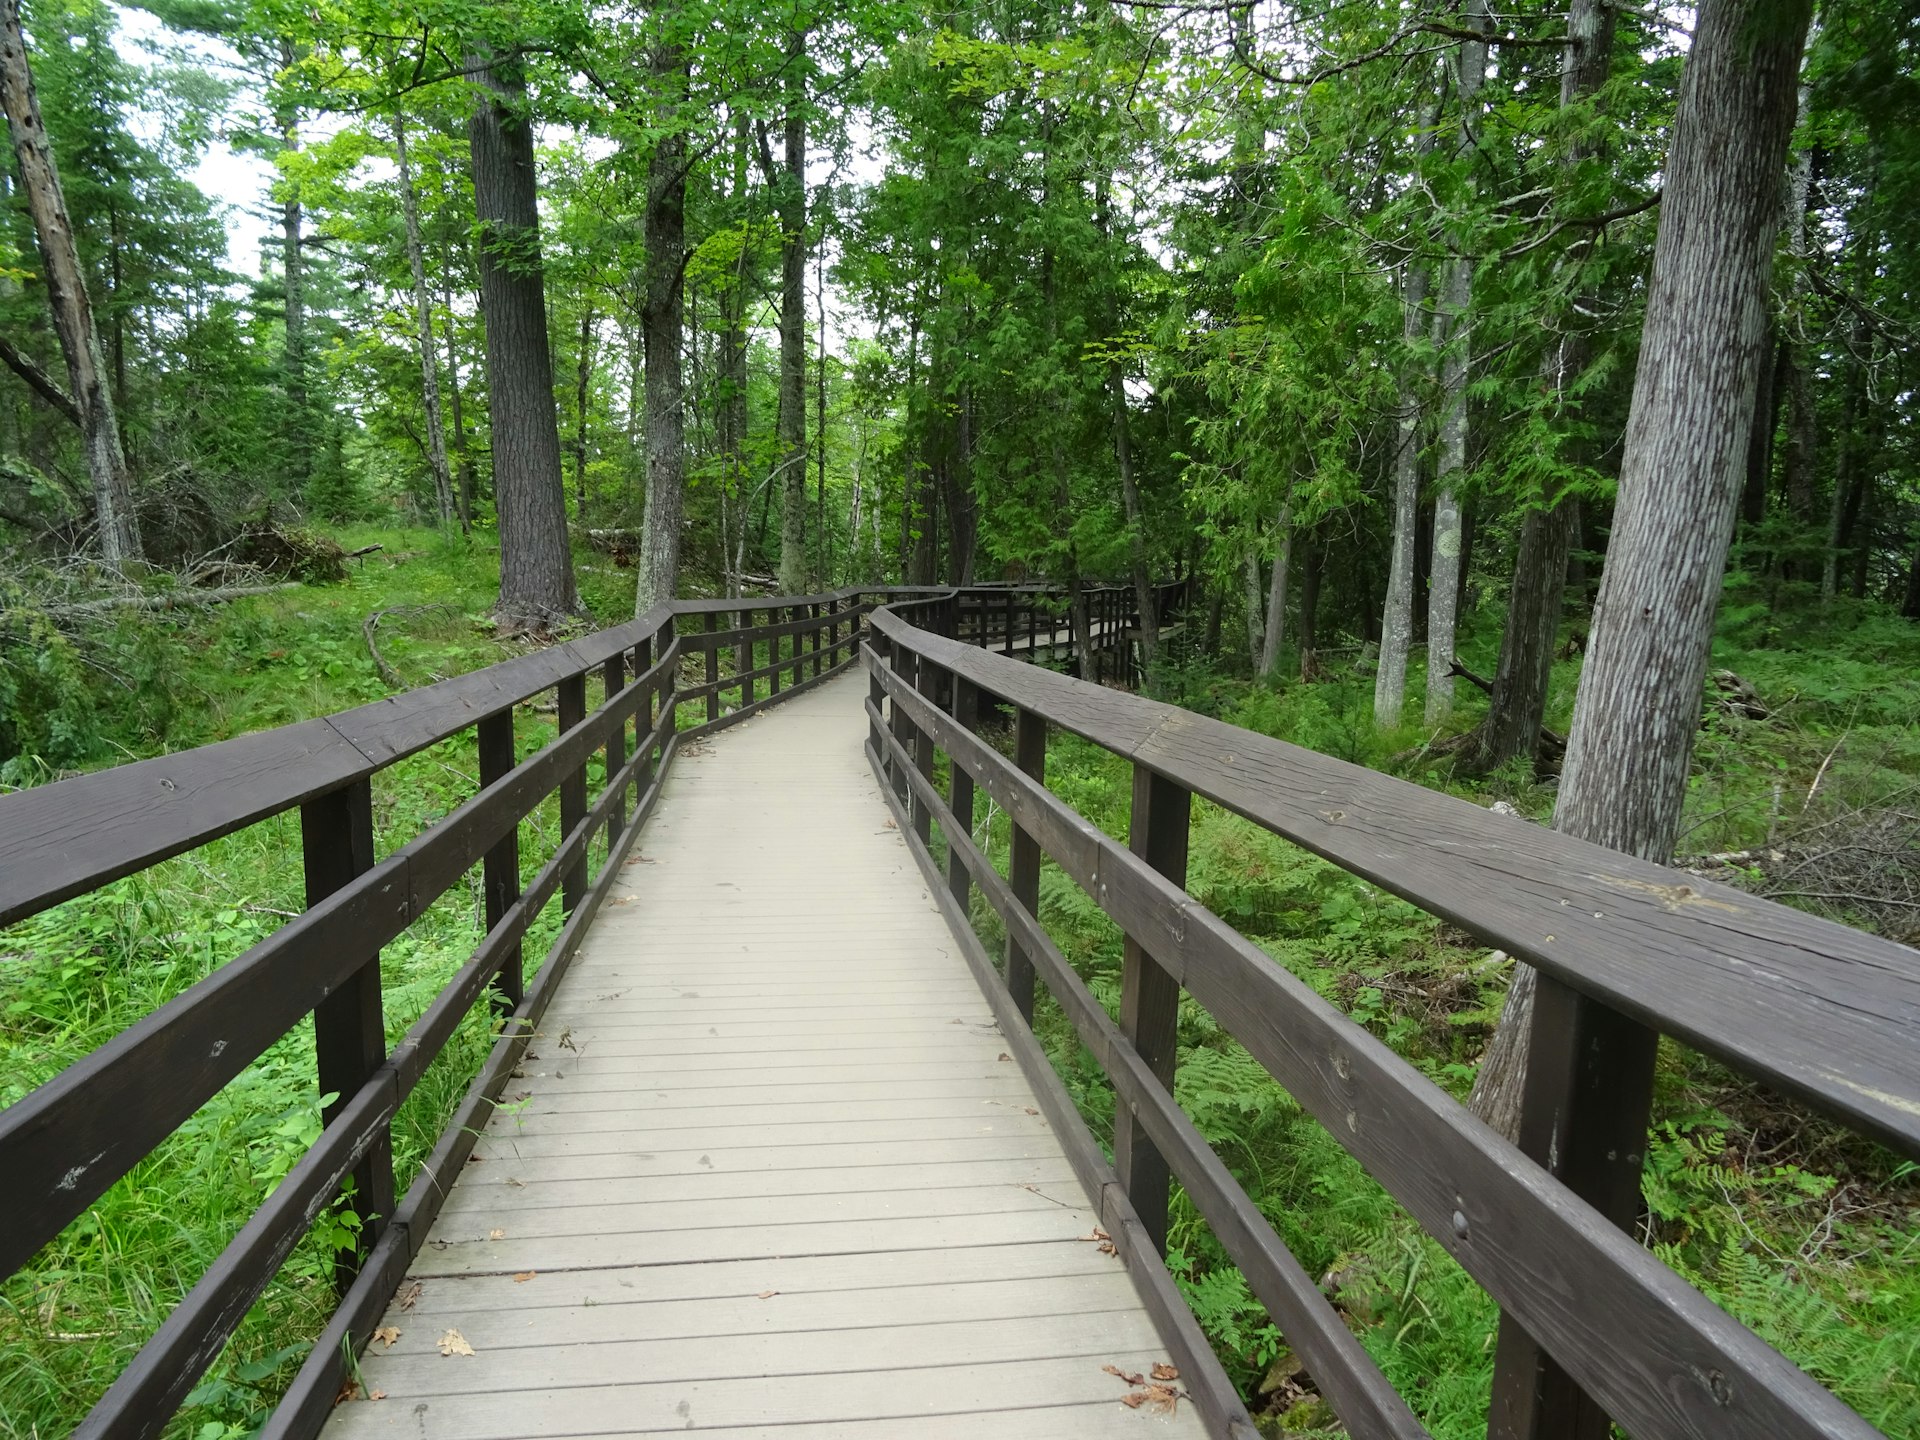 A wooden boardwalk with railings leads off into forest on the Boardwalk Trail, Madeline Island, Wisconsin